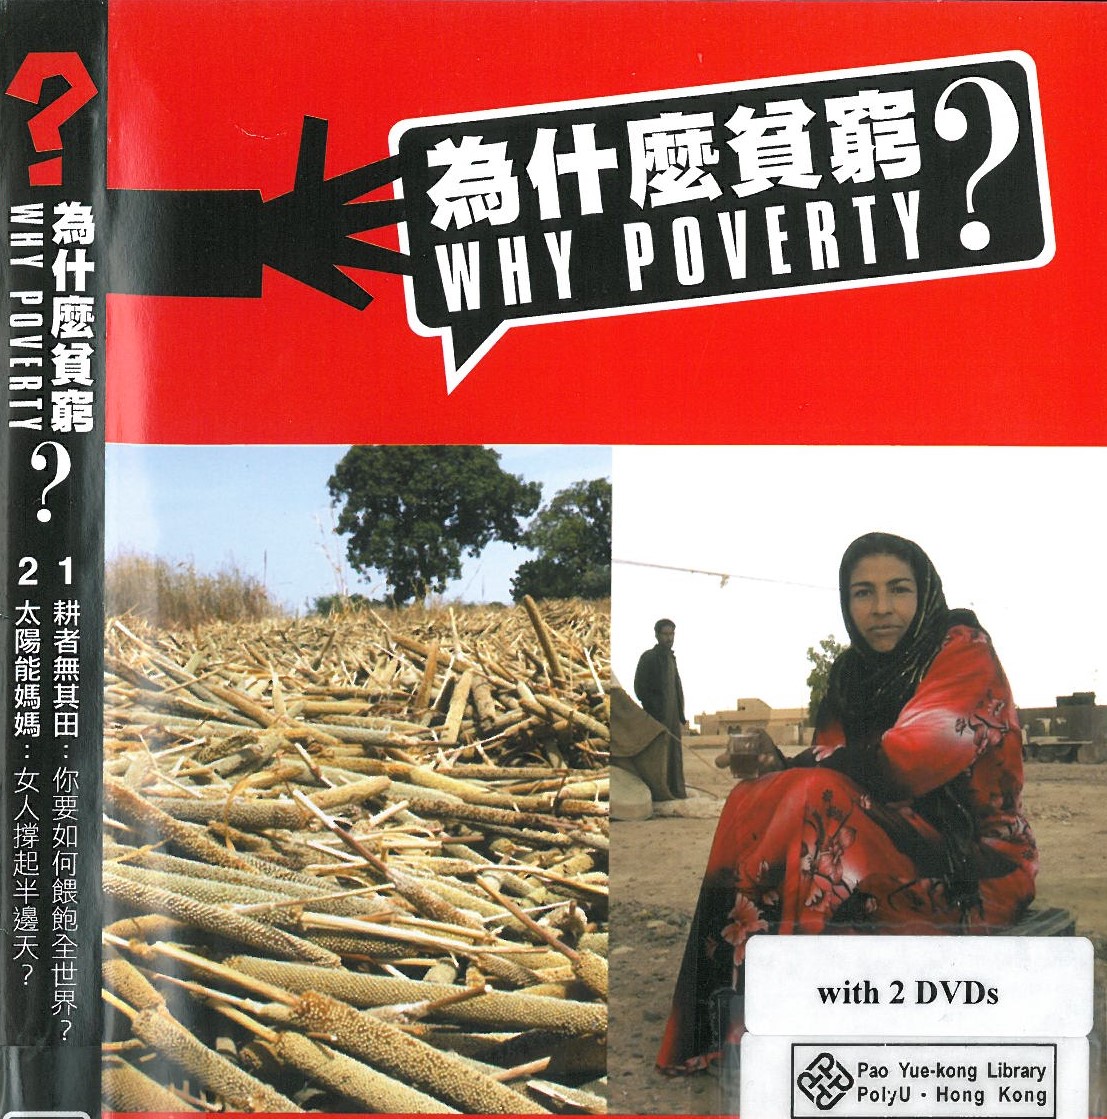 Why poverty? 為什麼貧窮?